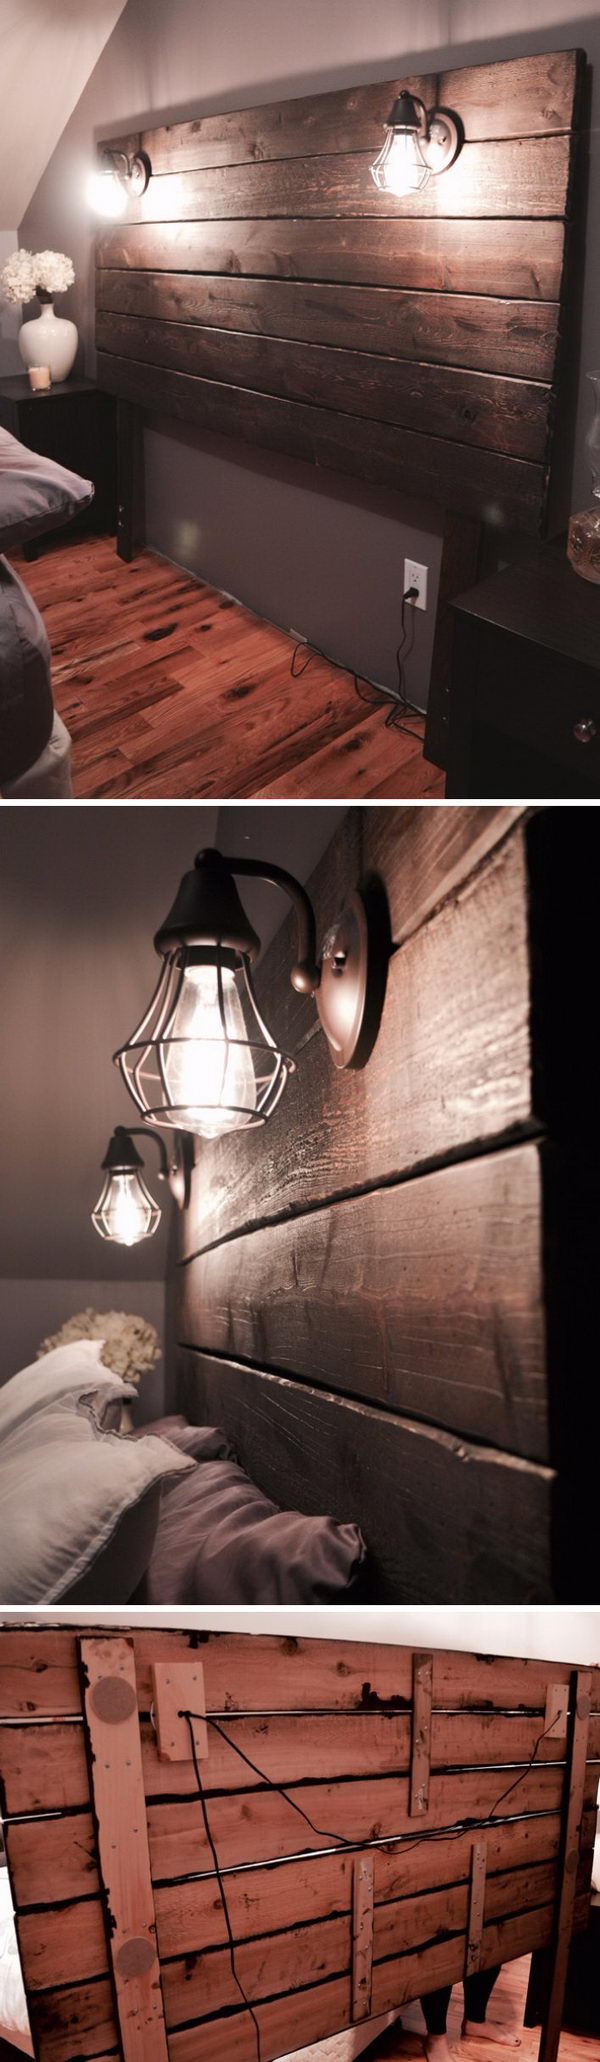 Rustic wooden headboard with lights. 